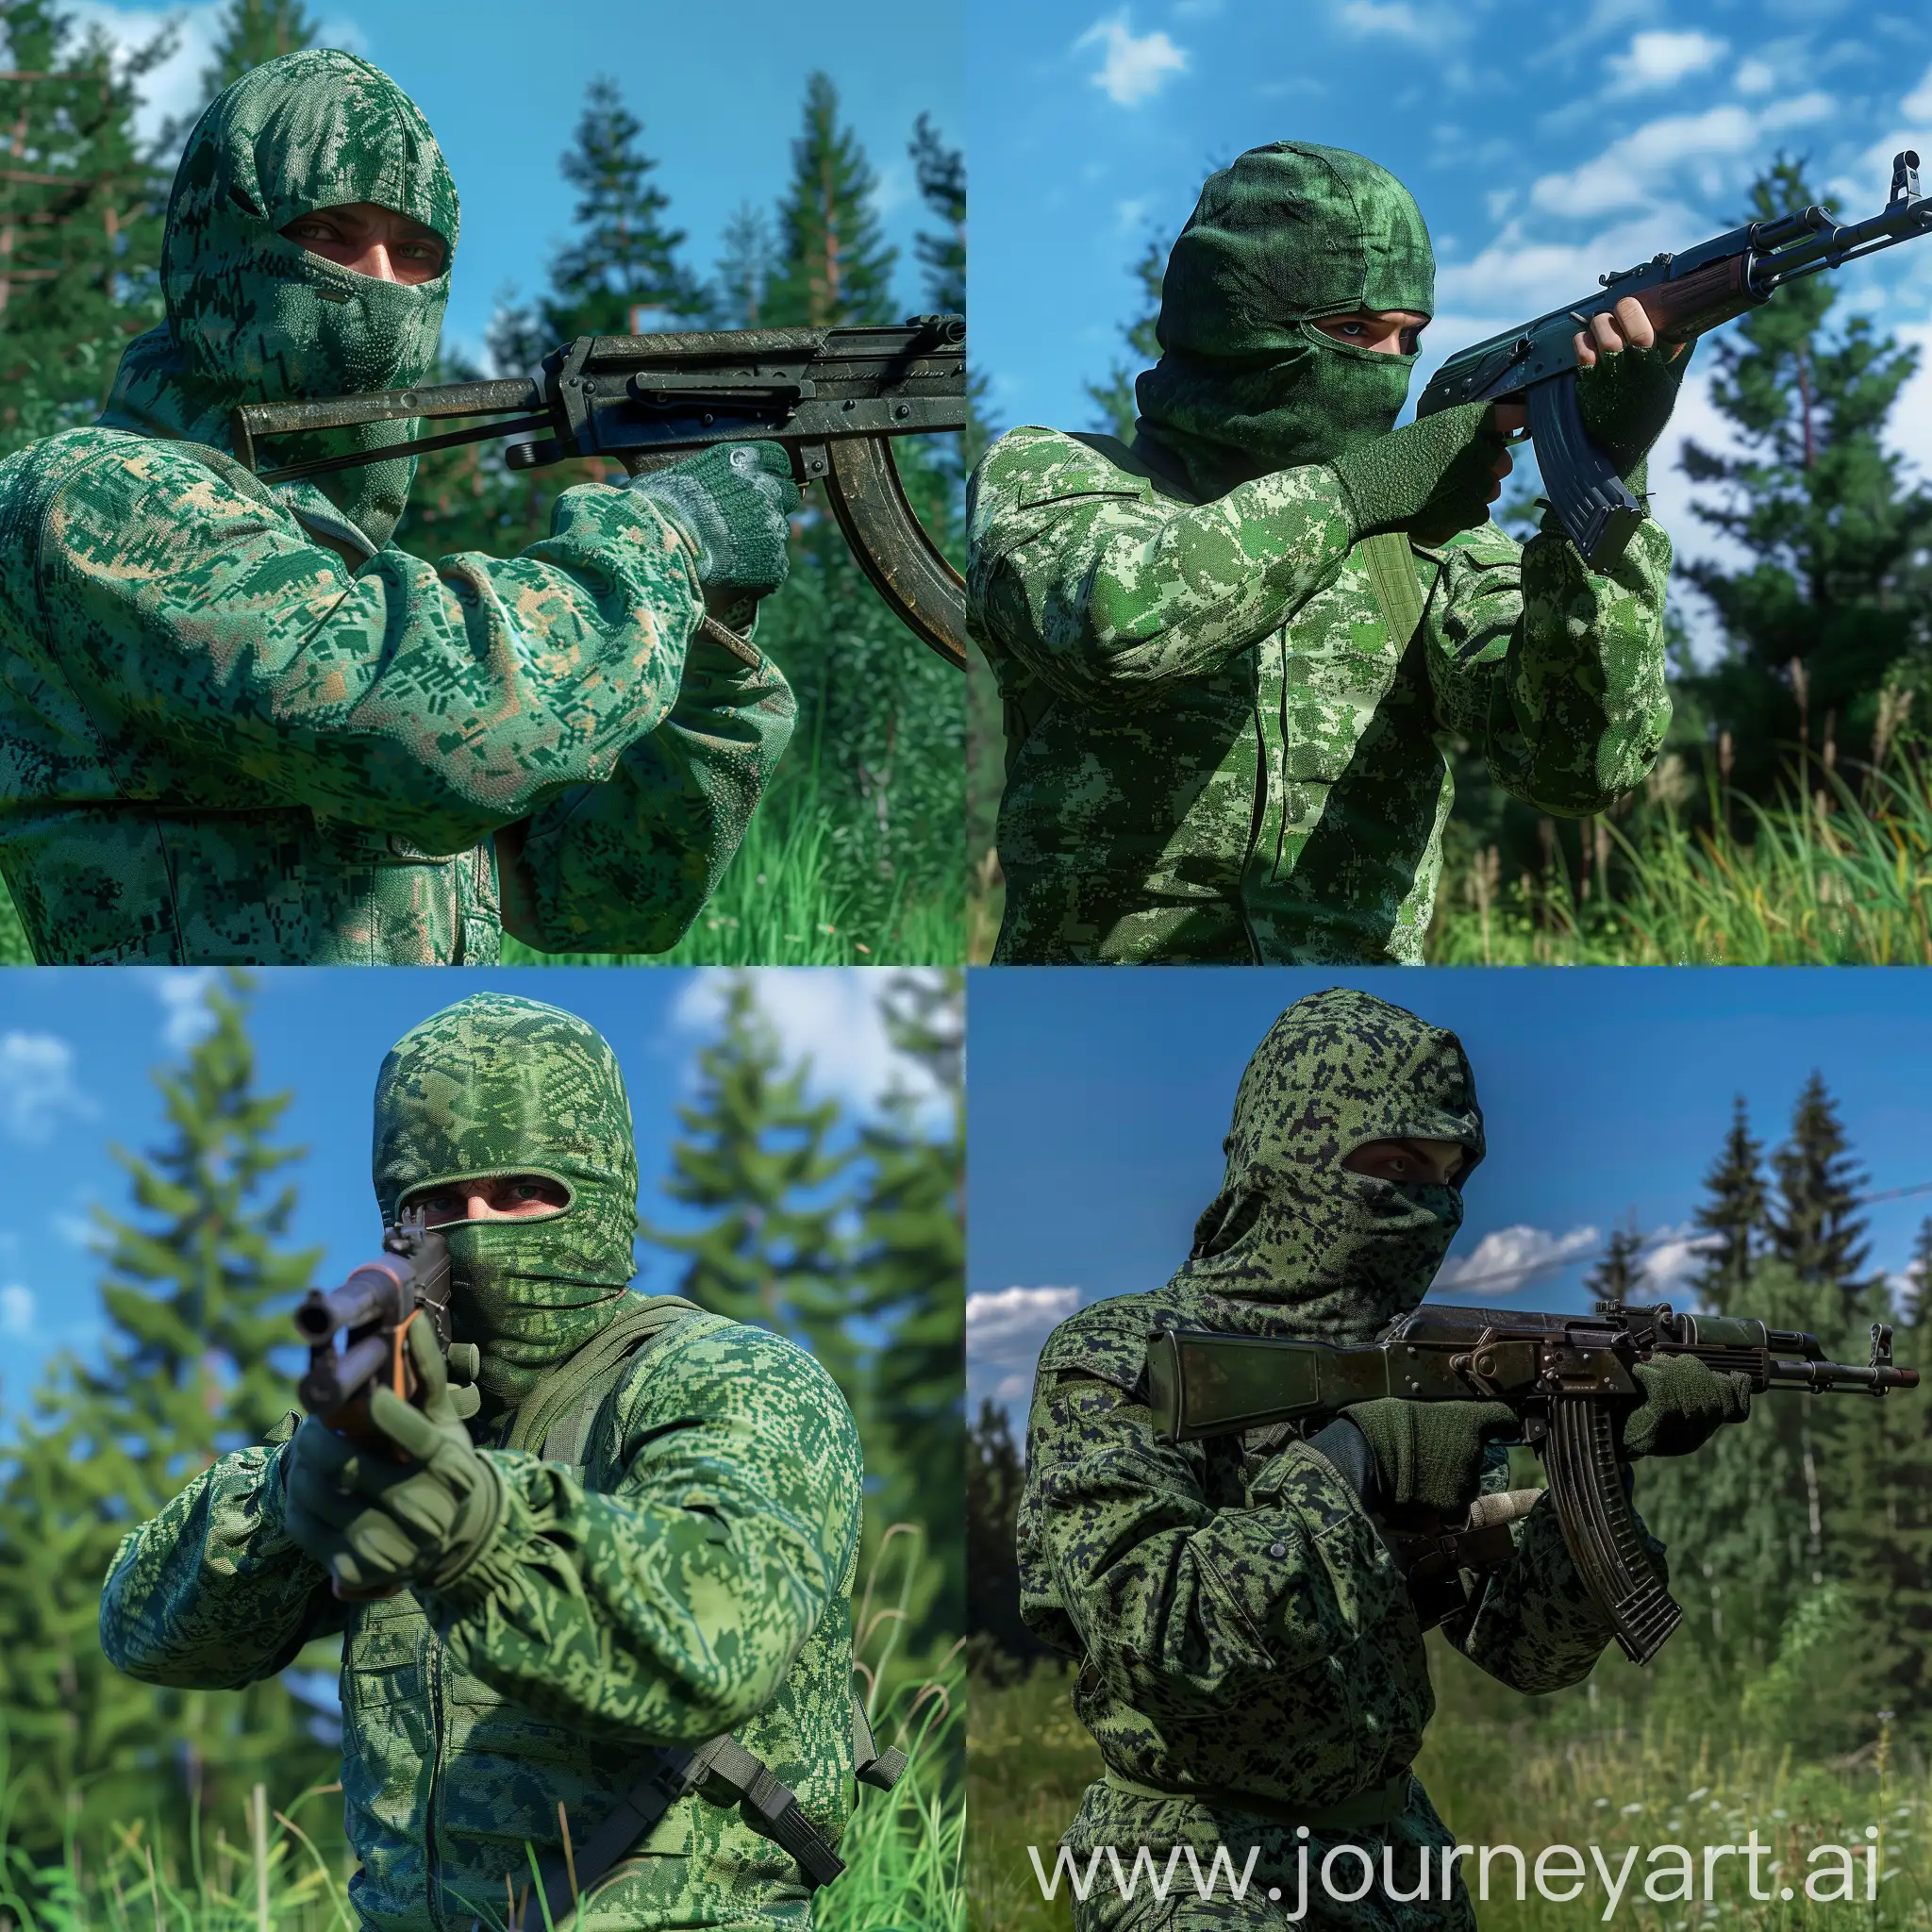 A man in a balaclava, green camouflage suit, holding a machine gun, forest background, blue sky, green grass, maximum detail, realistic, hdr, 8k